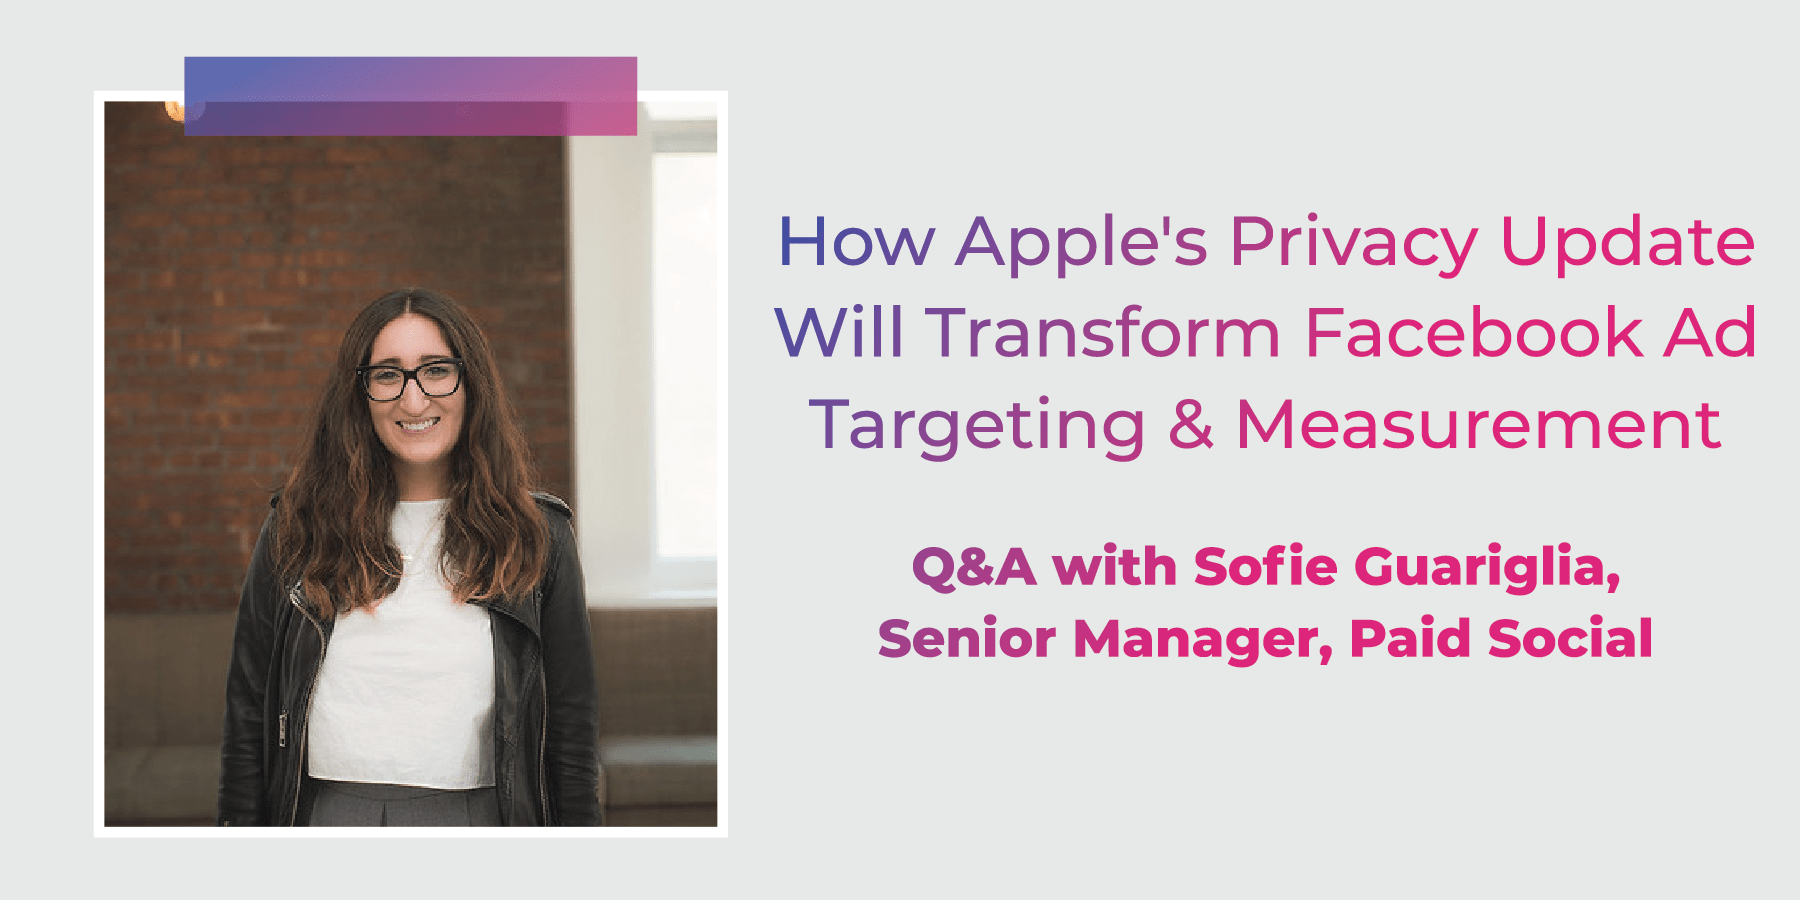 How Apple’s Privacy Update Will Transform Facebook Ad Targeting & Measurement